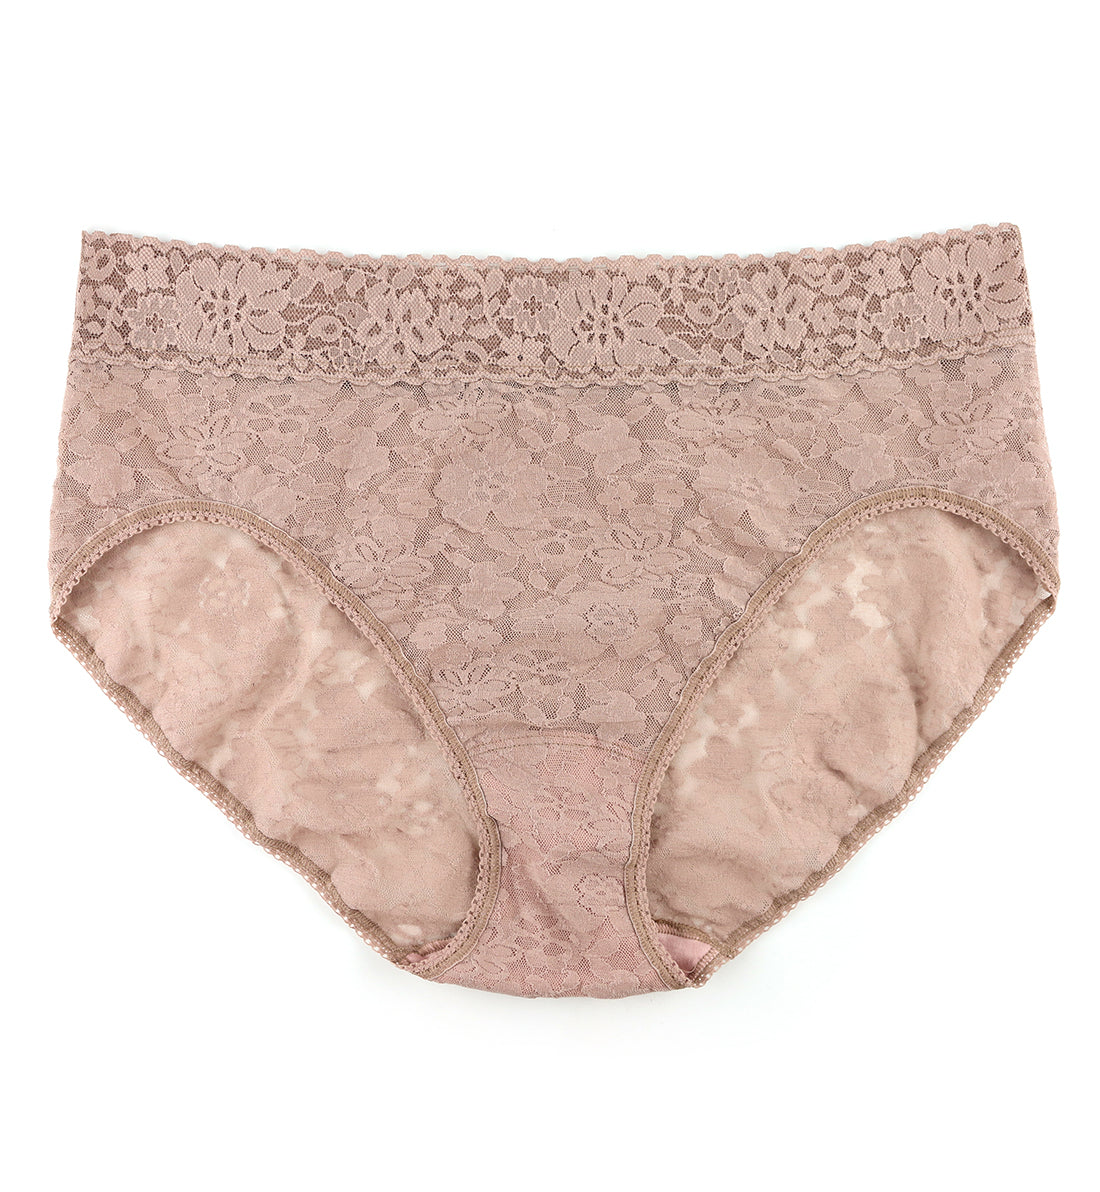 Hanky Panky Daily Lace French Brief PLUS (772461X),1X,Taupe - Taupe,1X